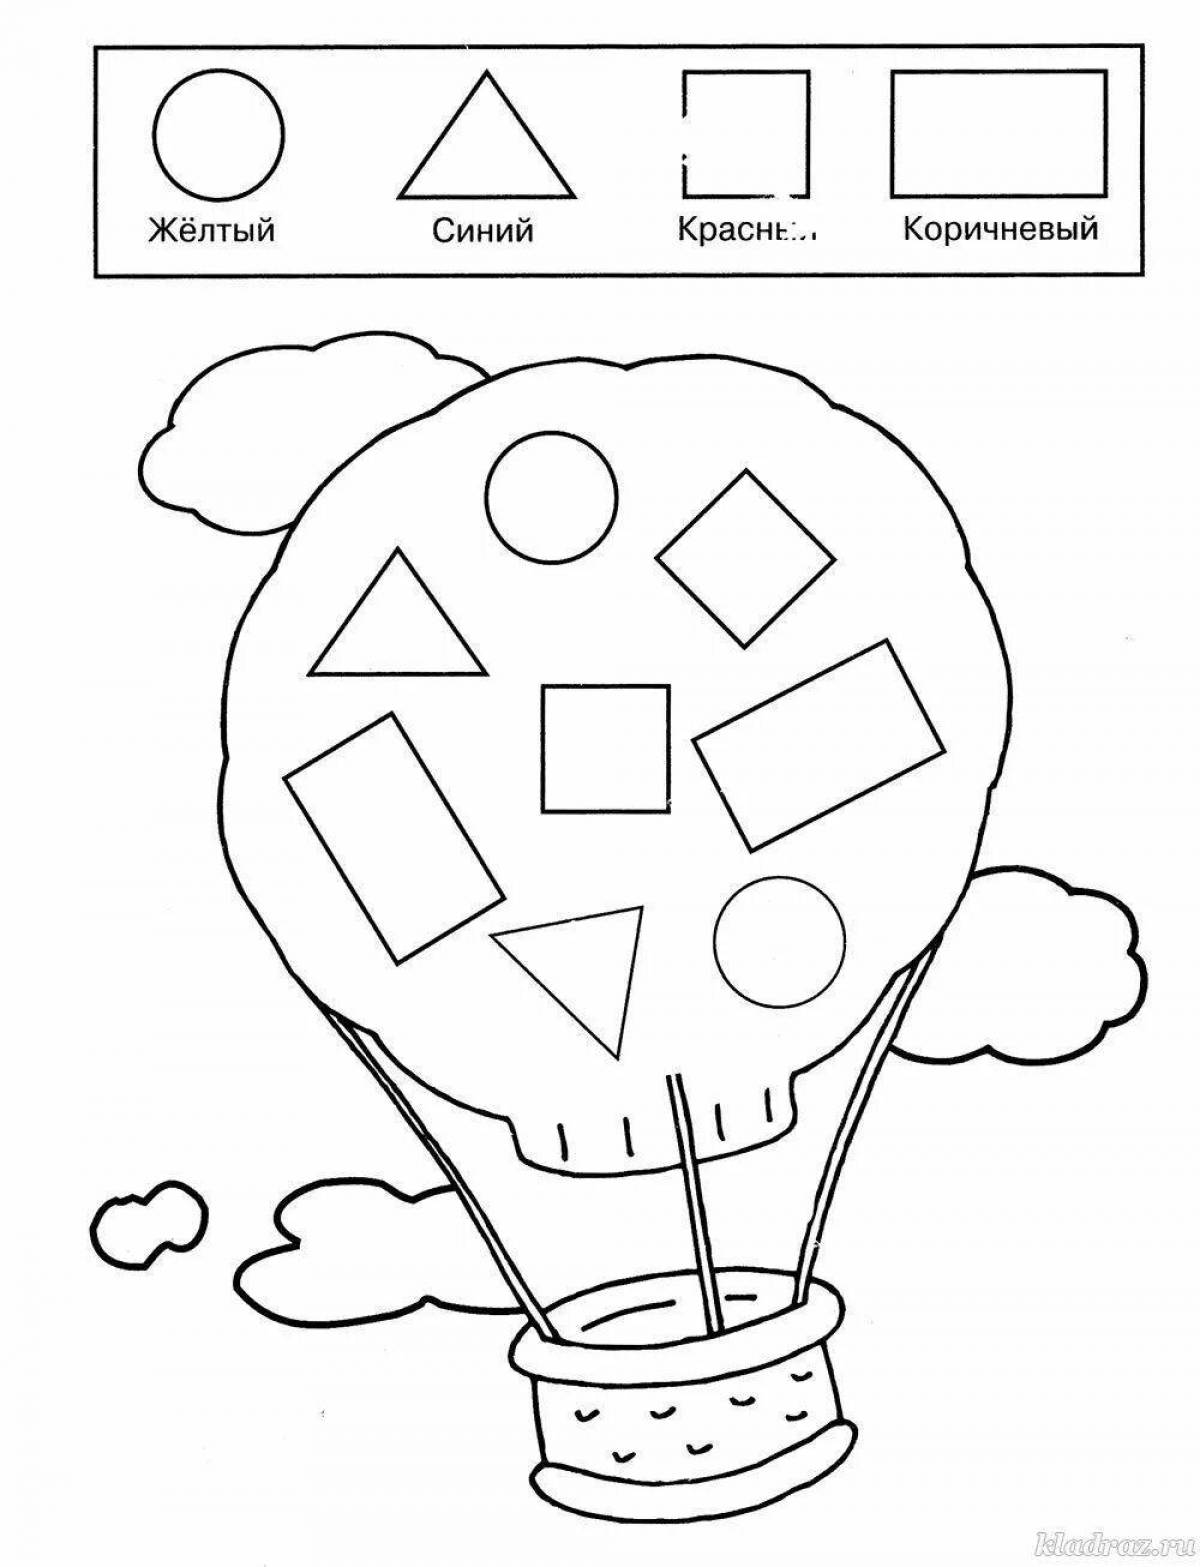 Color-fabulous mathematical medium group coloring page